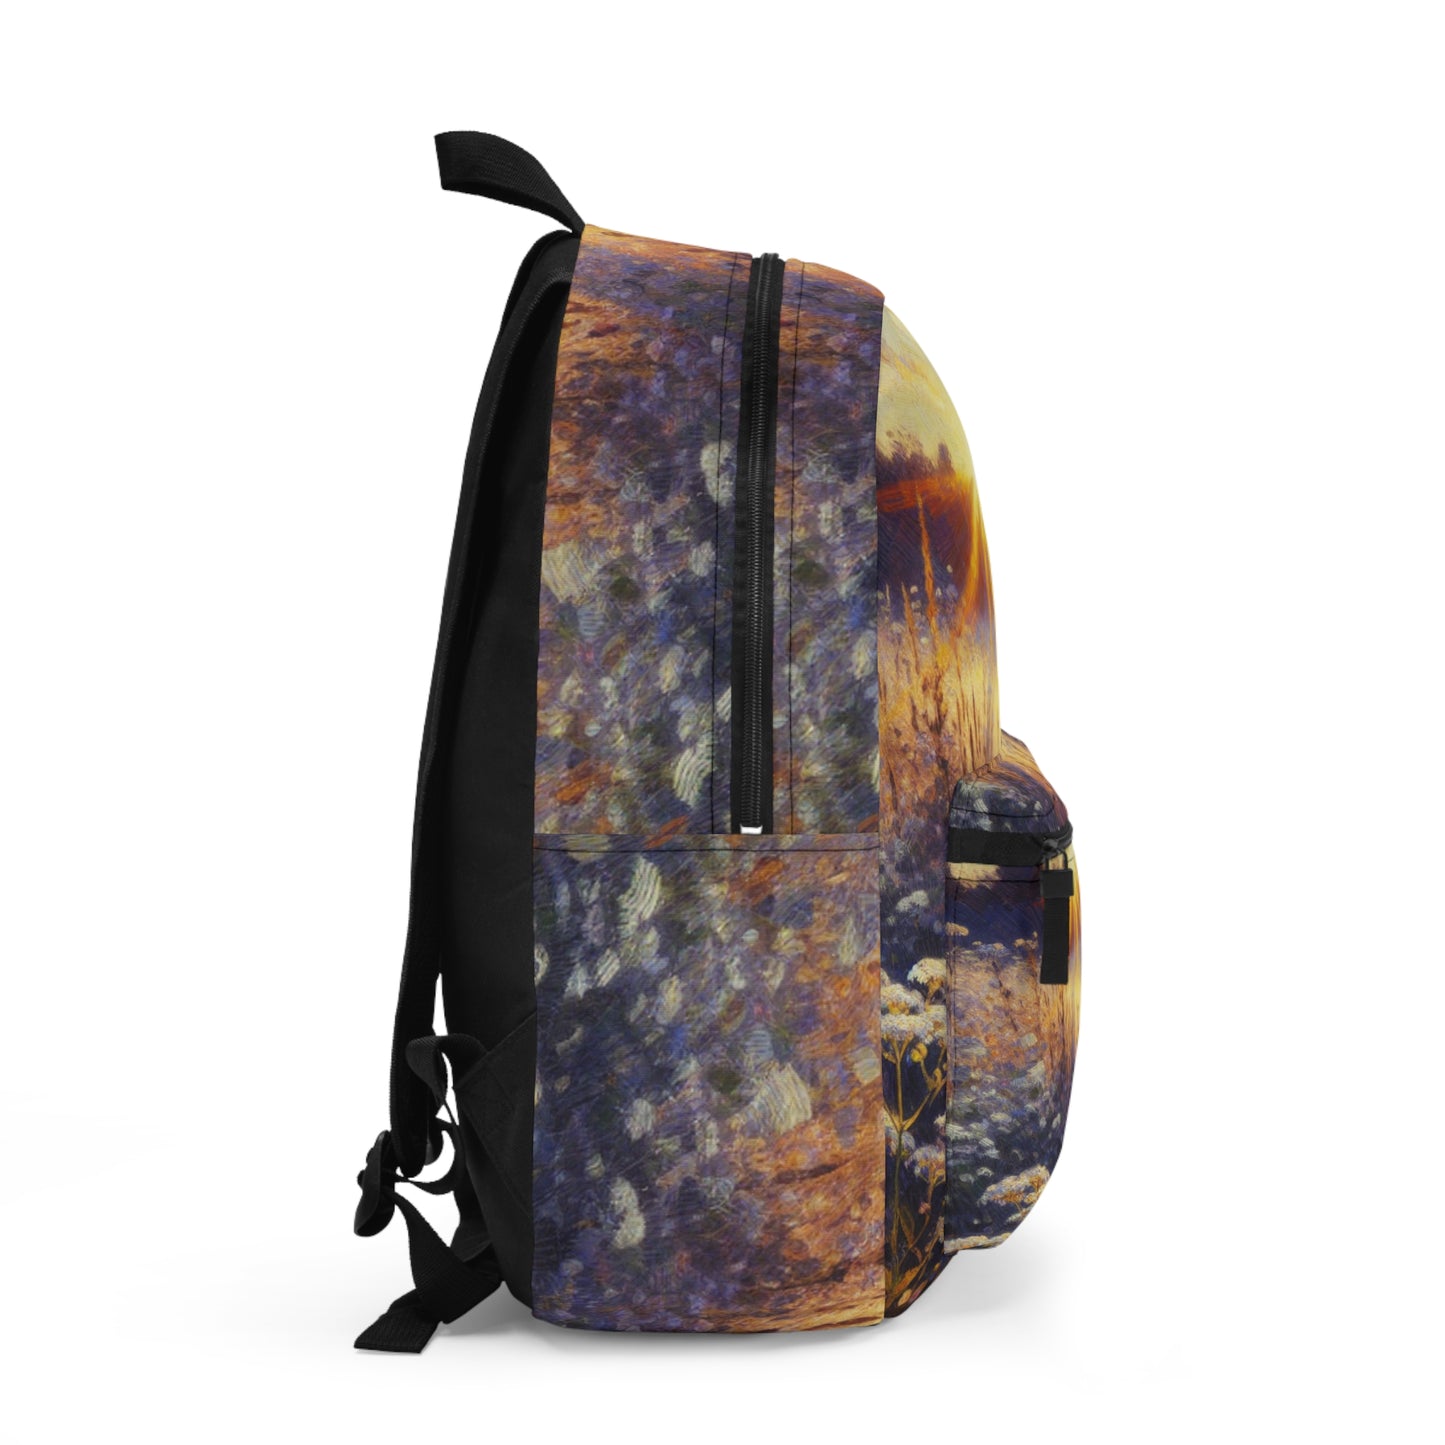 "Wildflower Sunrise" - The Alien Backpack Impressionism Style